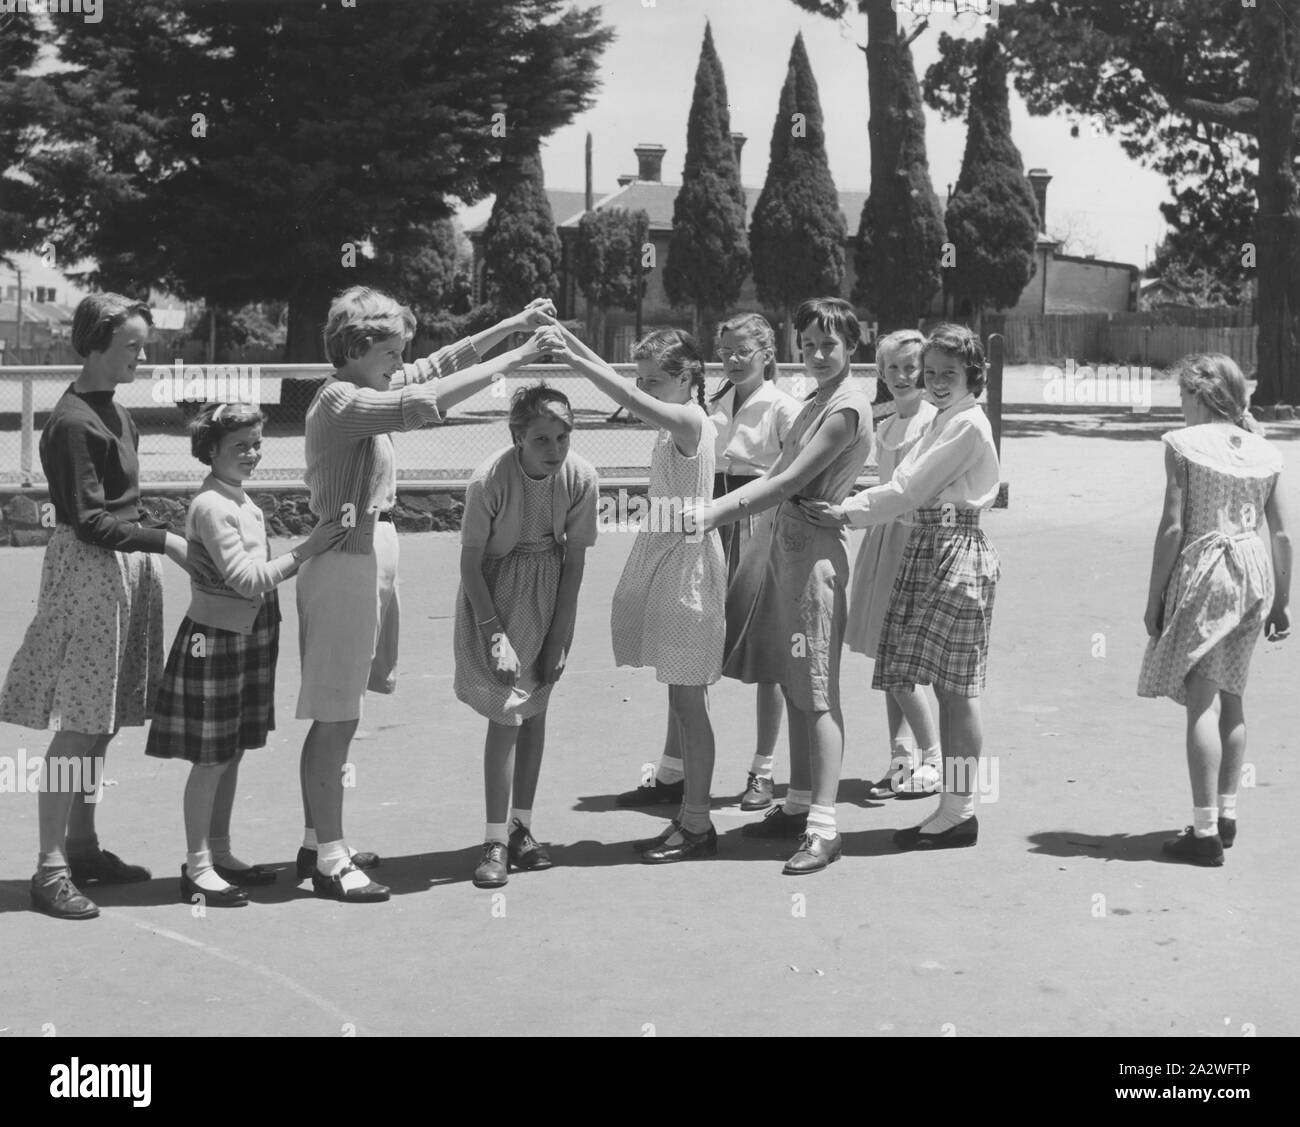 Photograph - Girls Playing 'Oranges & Lemons' Game, Dorothy Howard Tour, Melbourne, 1954, Black and white photograph depicting 10 girls playing 'Oranges & Lemons' in a government school playground, Melbourne, Victoria, 1954. It is one of a group of photographs probably taken by American folklorist Dr Dorothy Howard while she was studying children's games and playlore in Australia under a Fulbright research grant,1954-1955. Her photographs and research have become part of Stock Photo